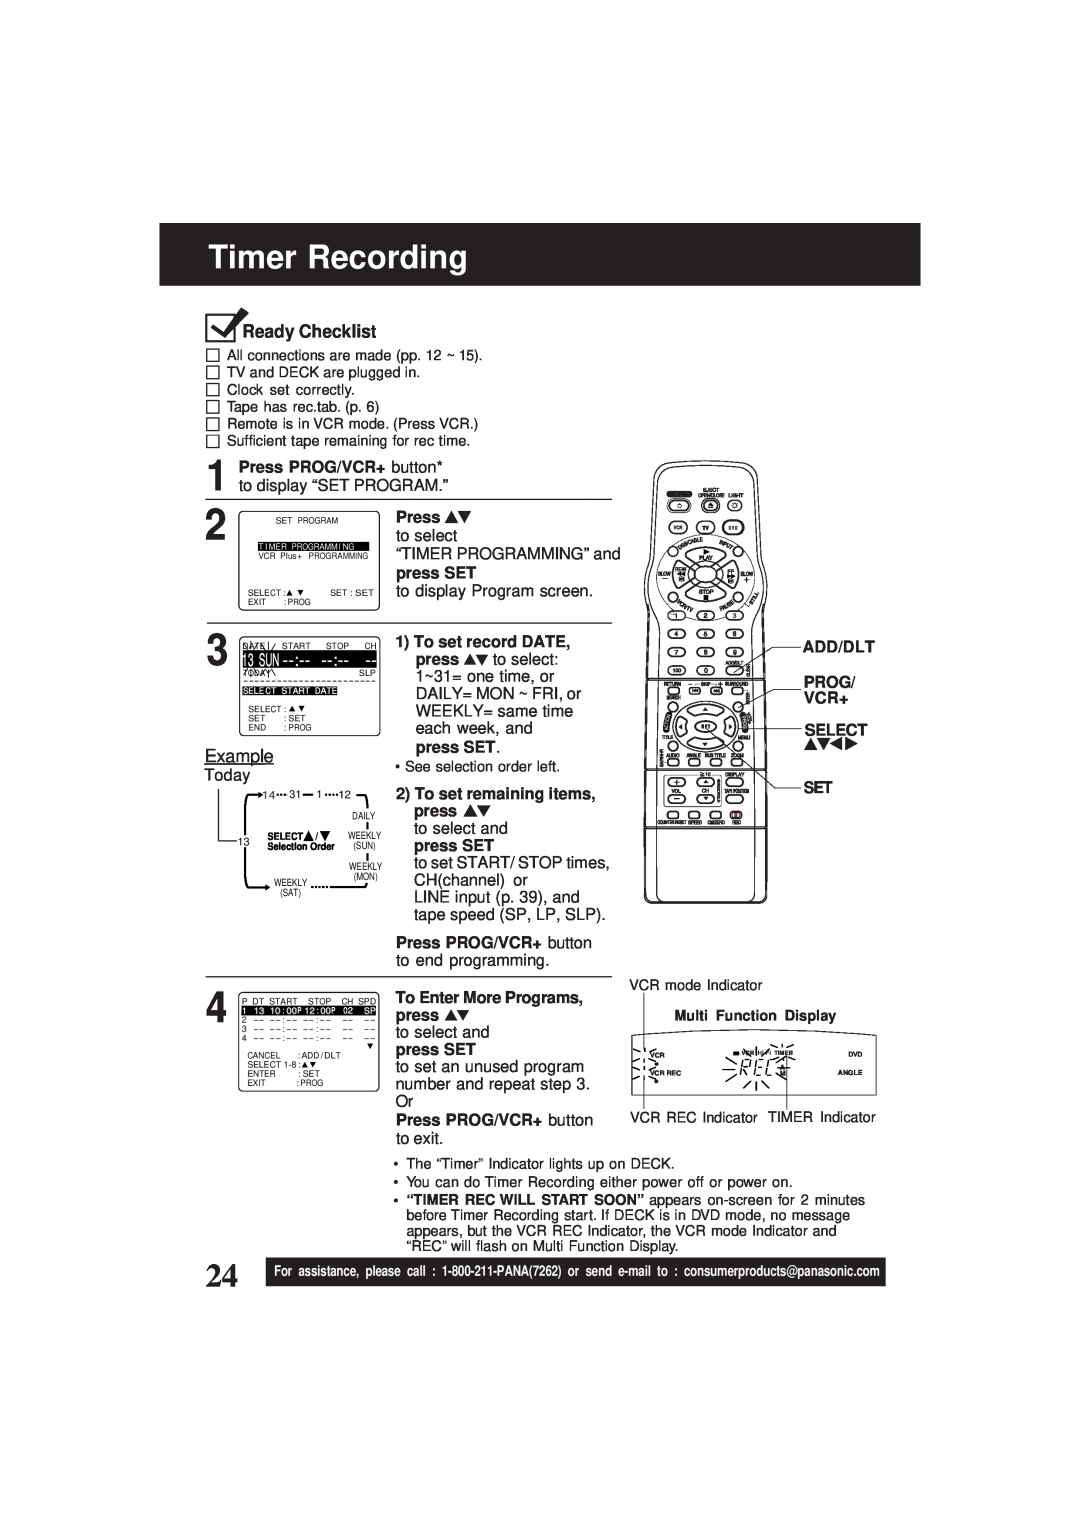 Panasonic PV-D4761 Timer Recording, Ready Checklist, Example, Press PROG/VCR+ button, to display “SET PROGRAM.”, to select 